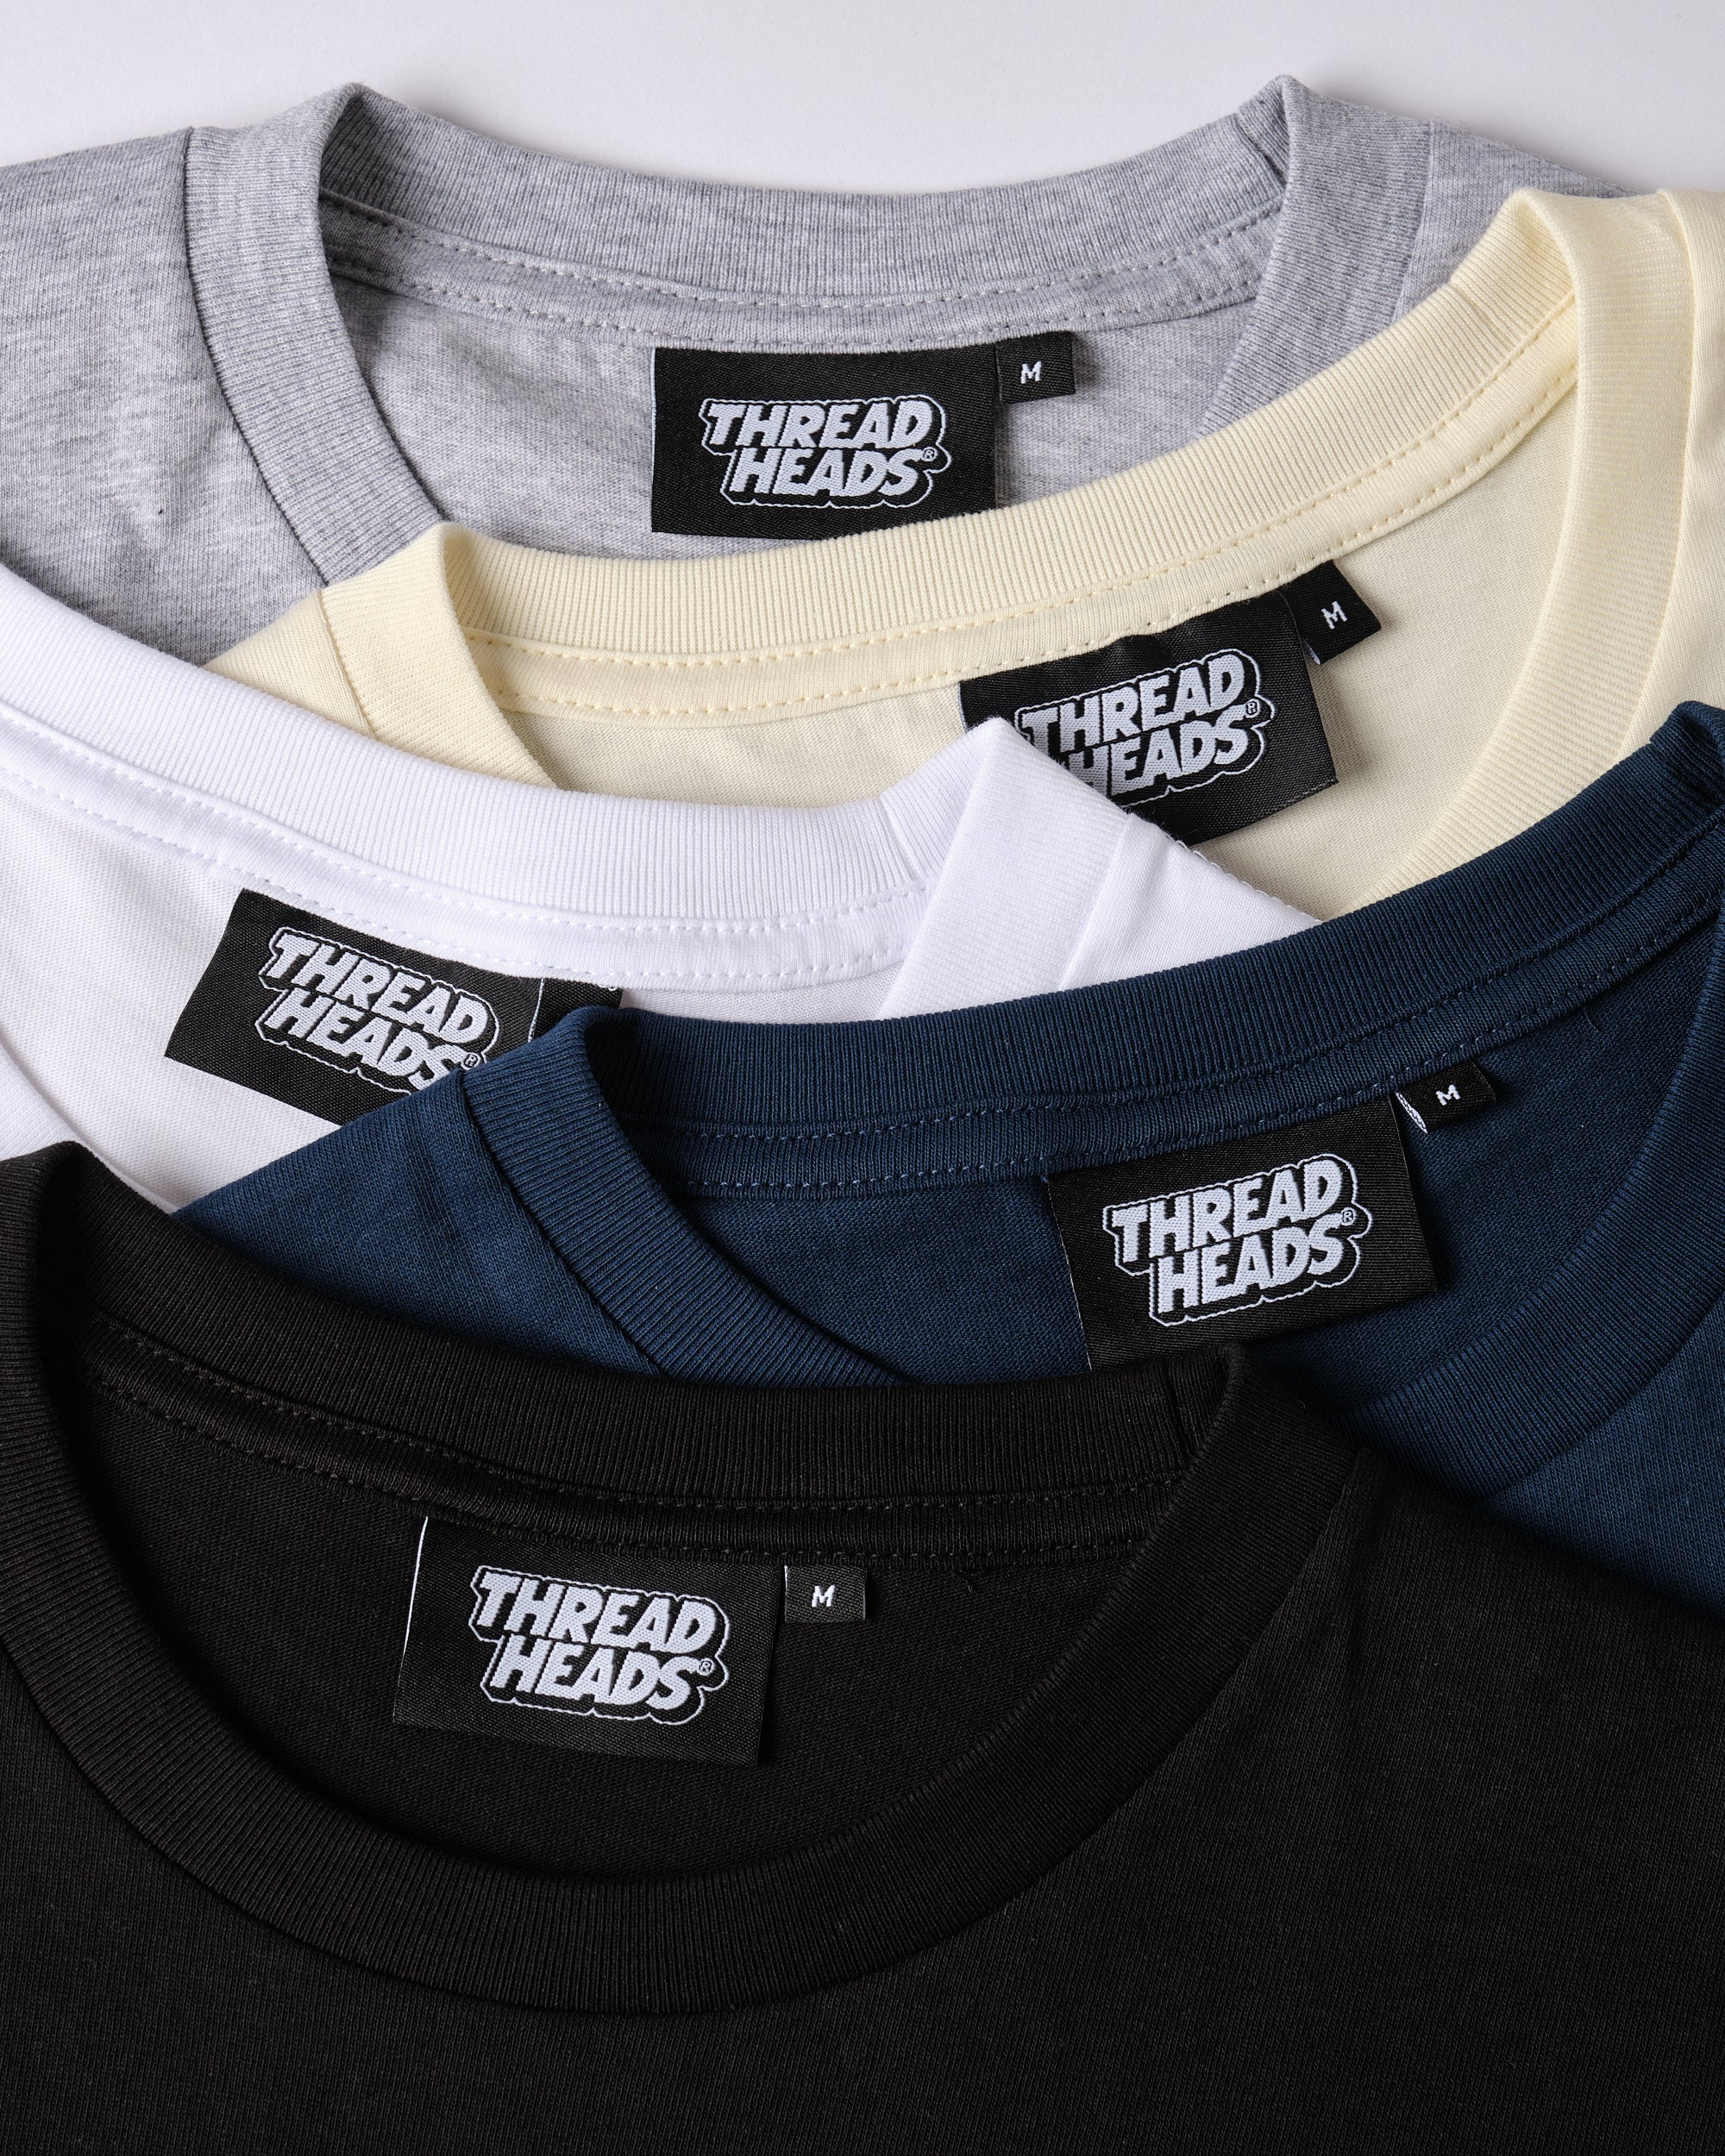 Classic Tee 5-Pack: Black, Navy, White, Natural, Grey